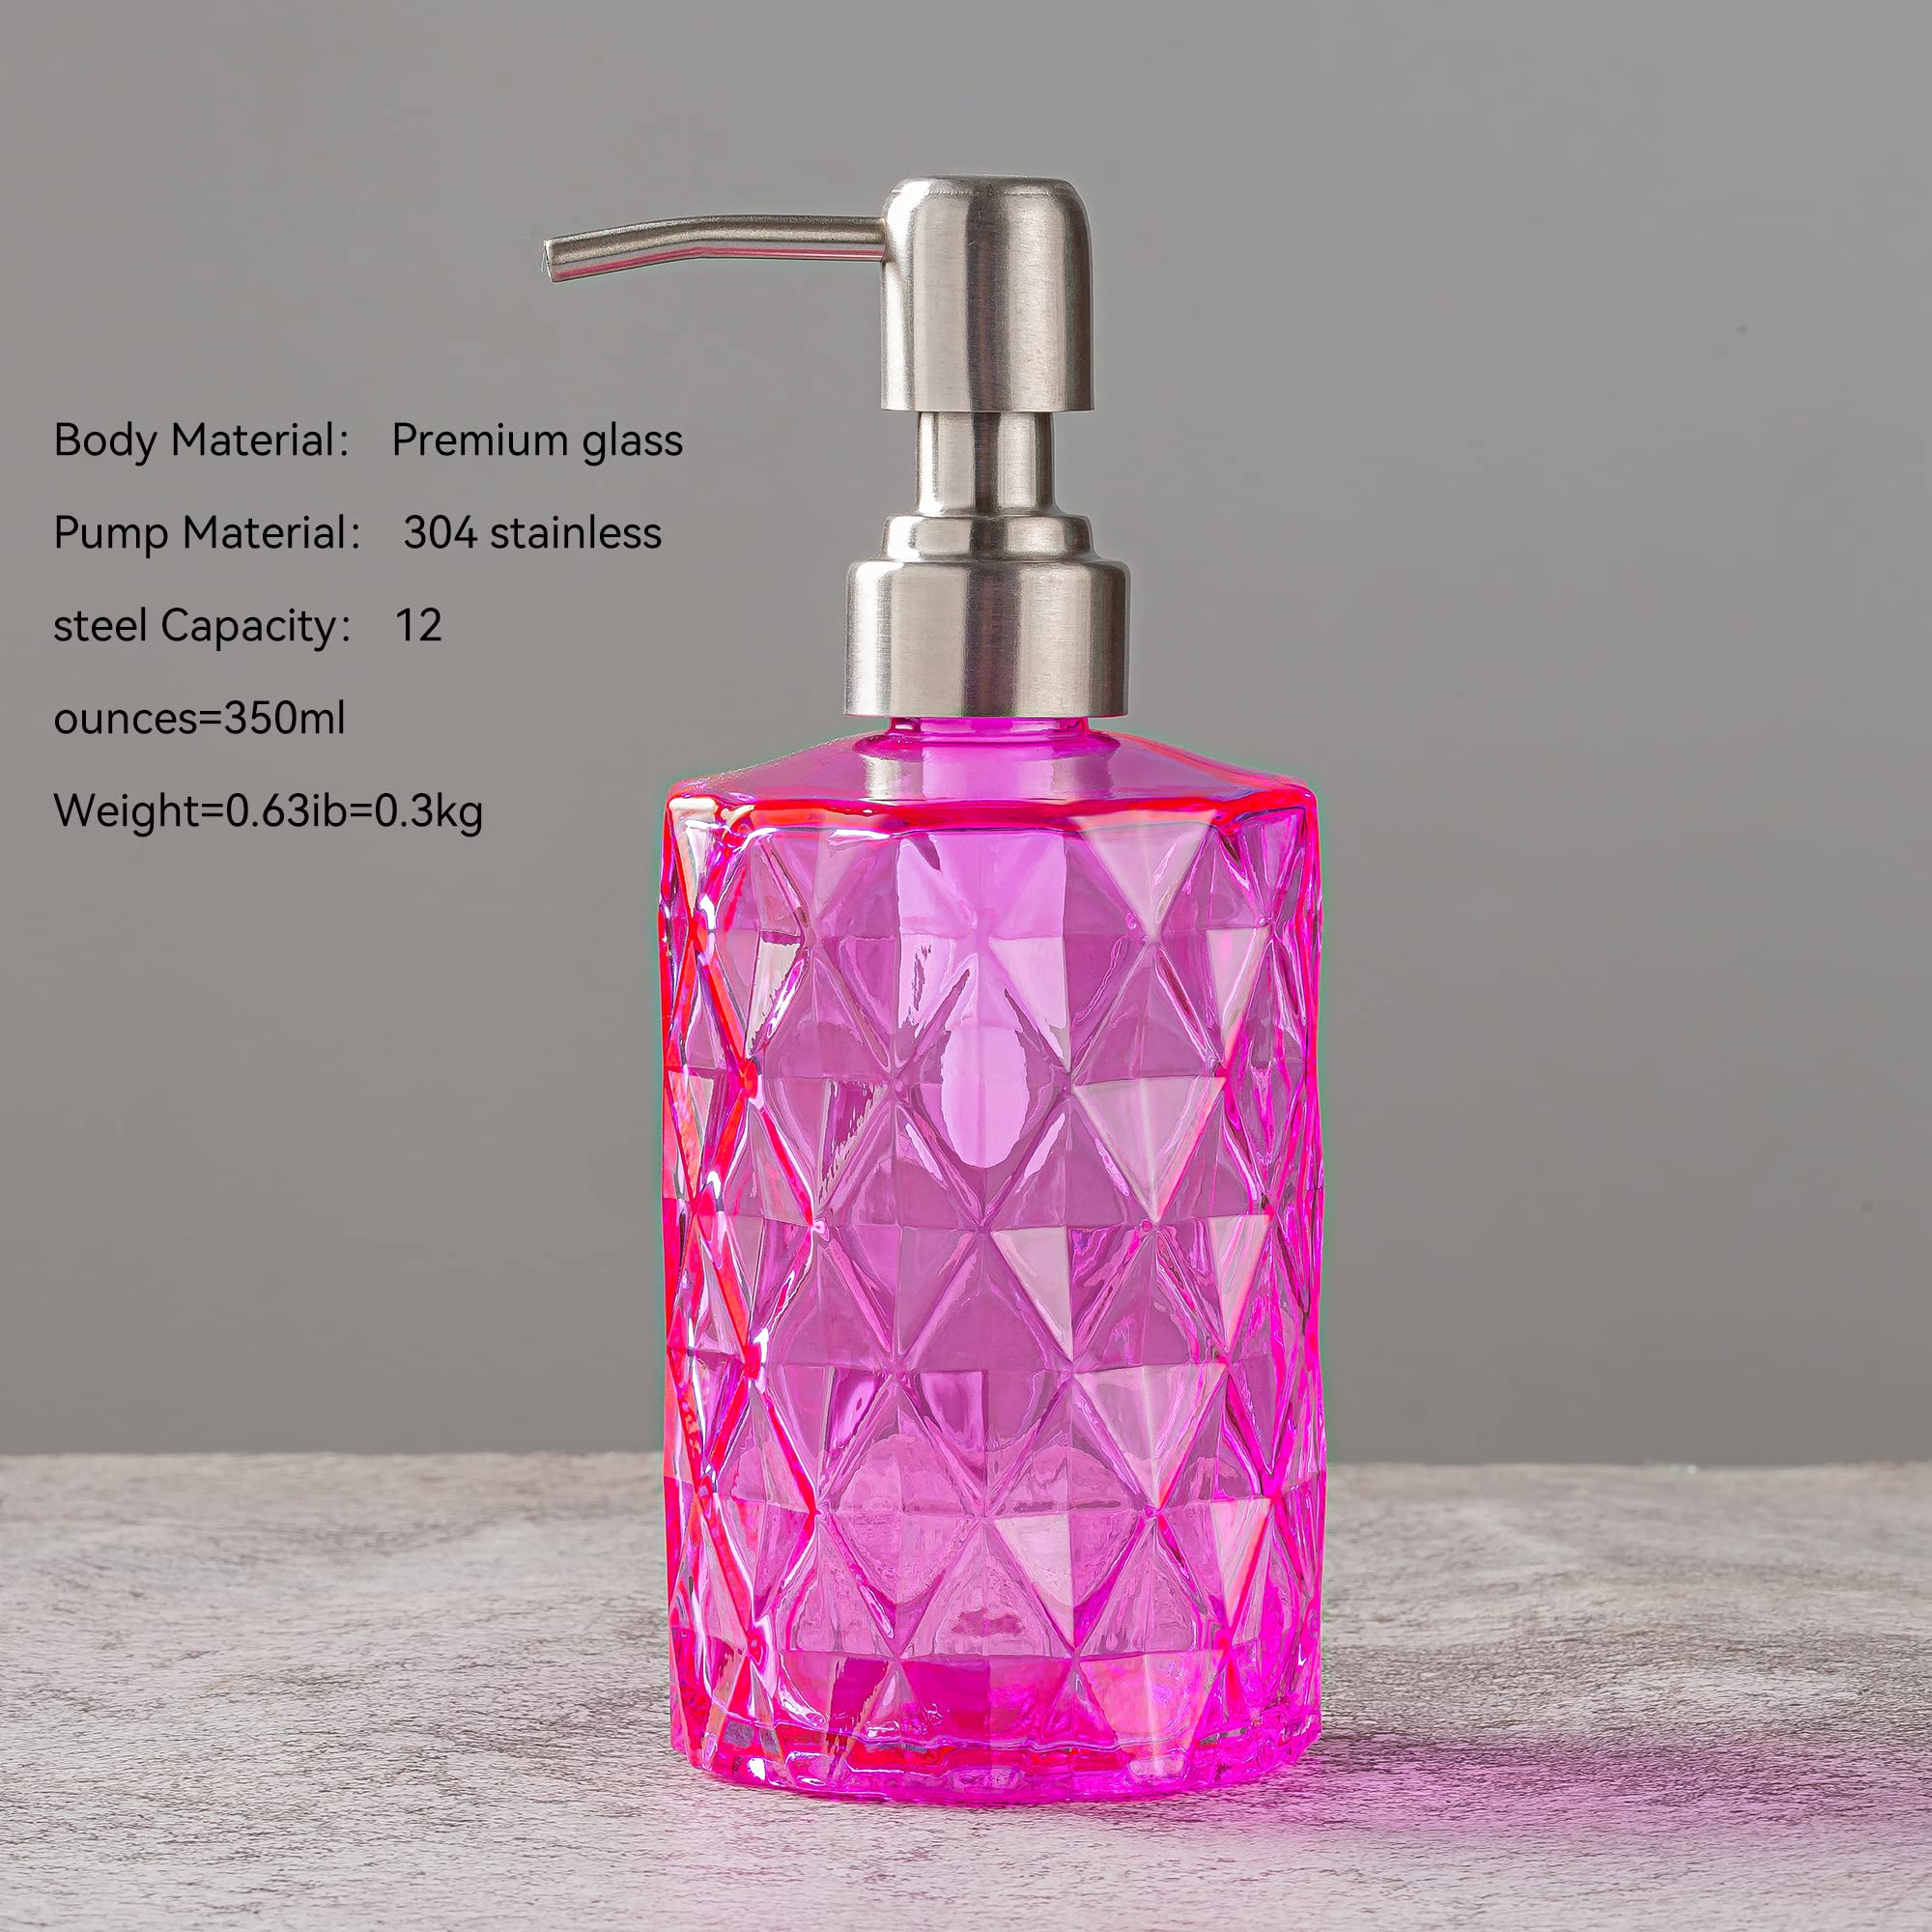 Easy Tang Clear Glass Hand Soap Dispenser Bathroom Kitchen 12 Oz Refillable Liquid Crystal Design Bottle with Silver Pump (Pink)